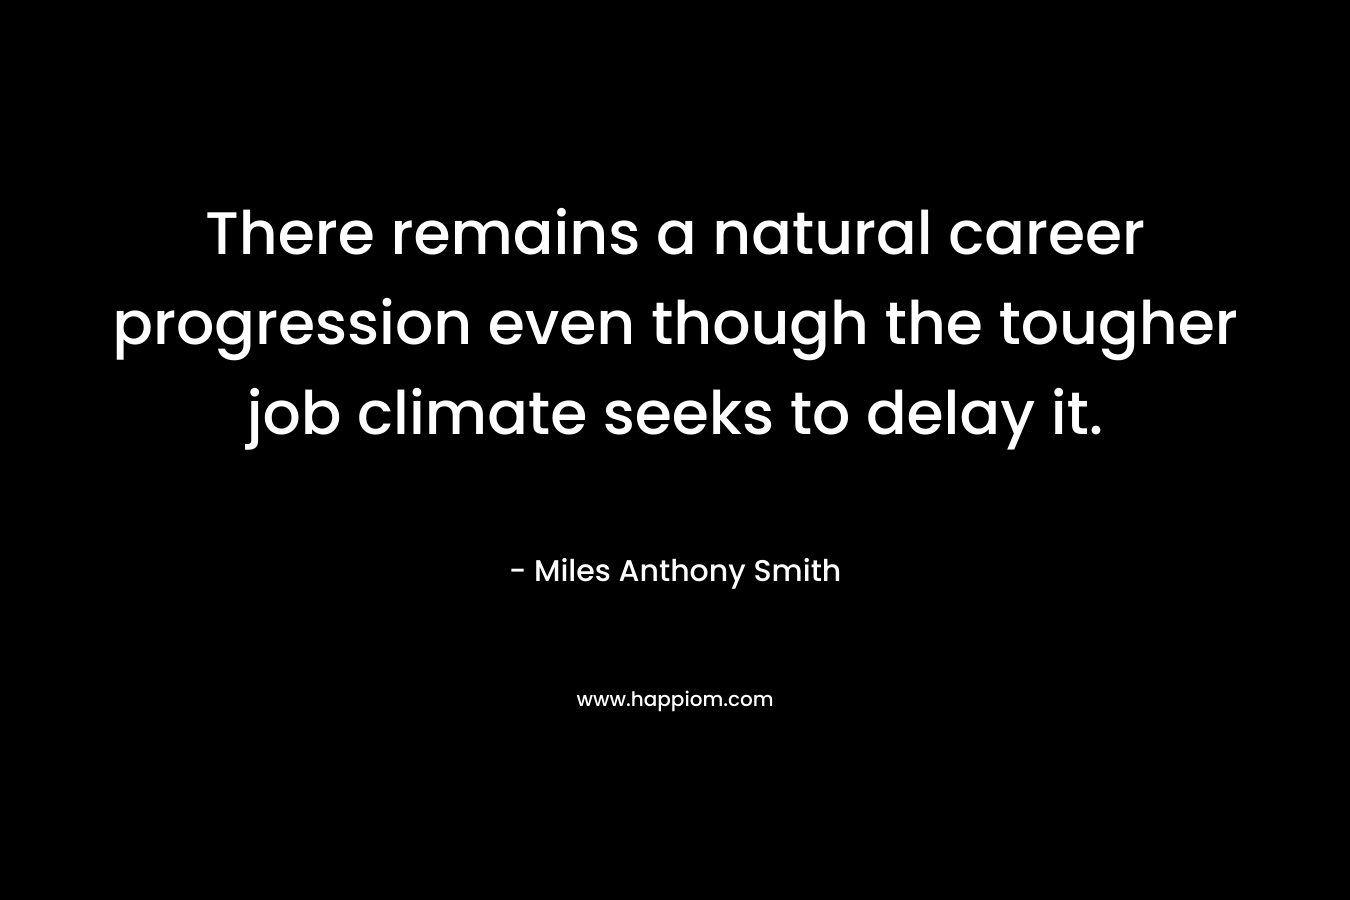 There remains a natural career progression even though the tougher job climate seeks to delay it. – Miles Anthony Smith